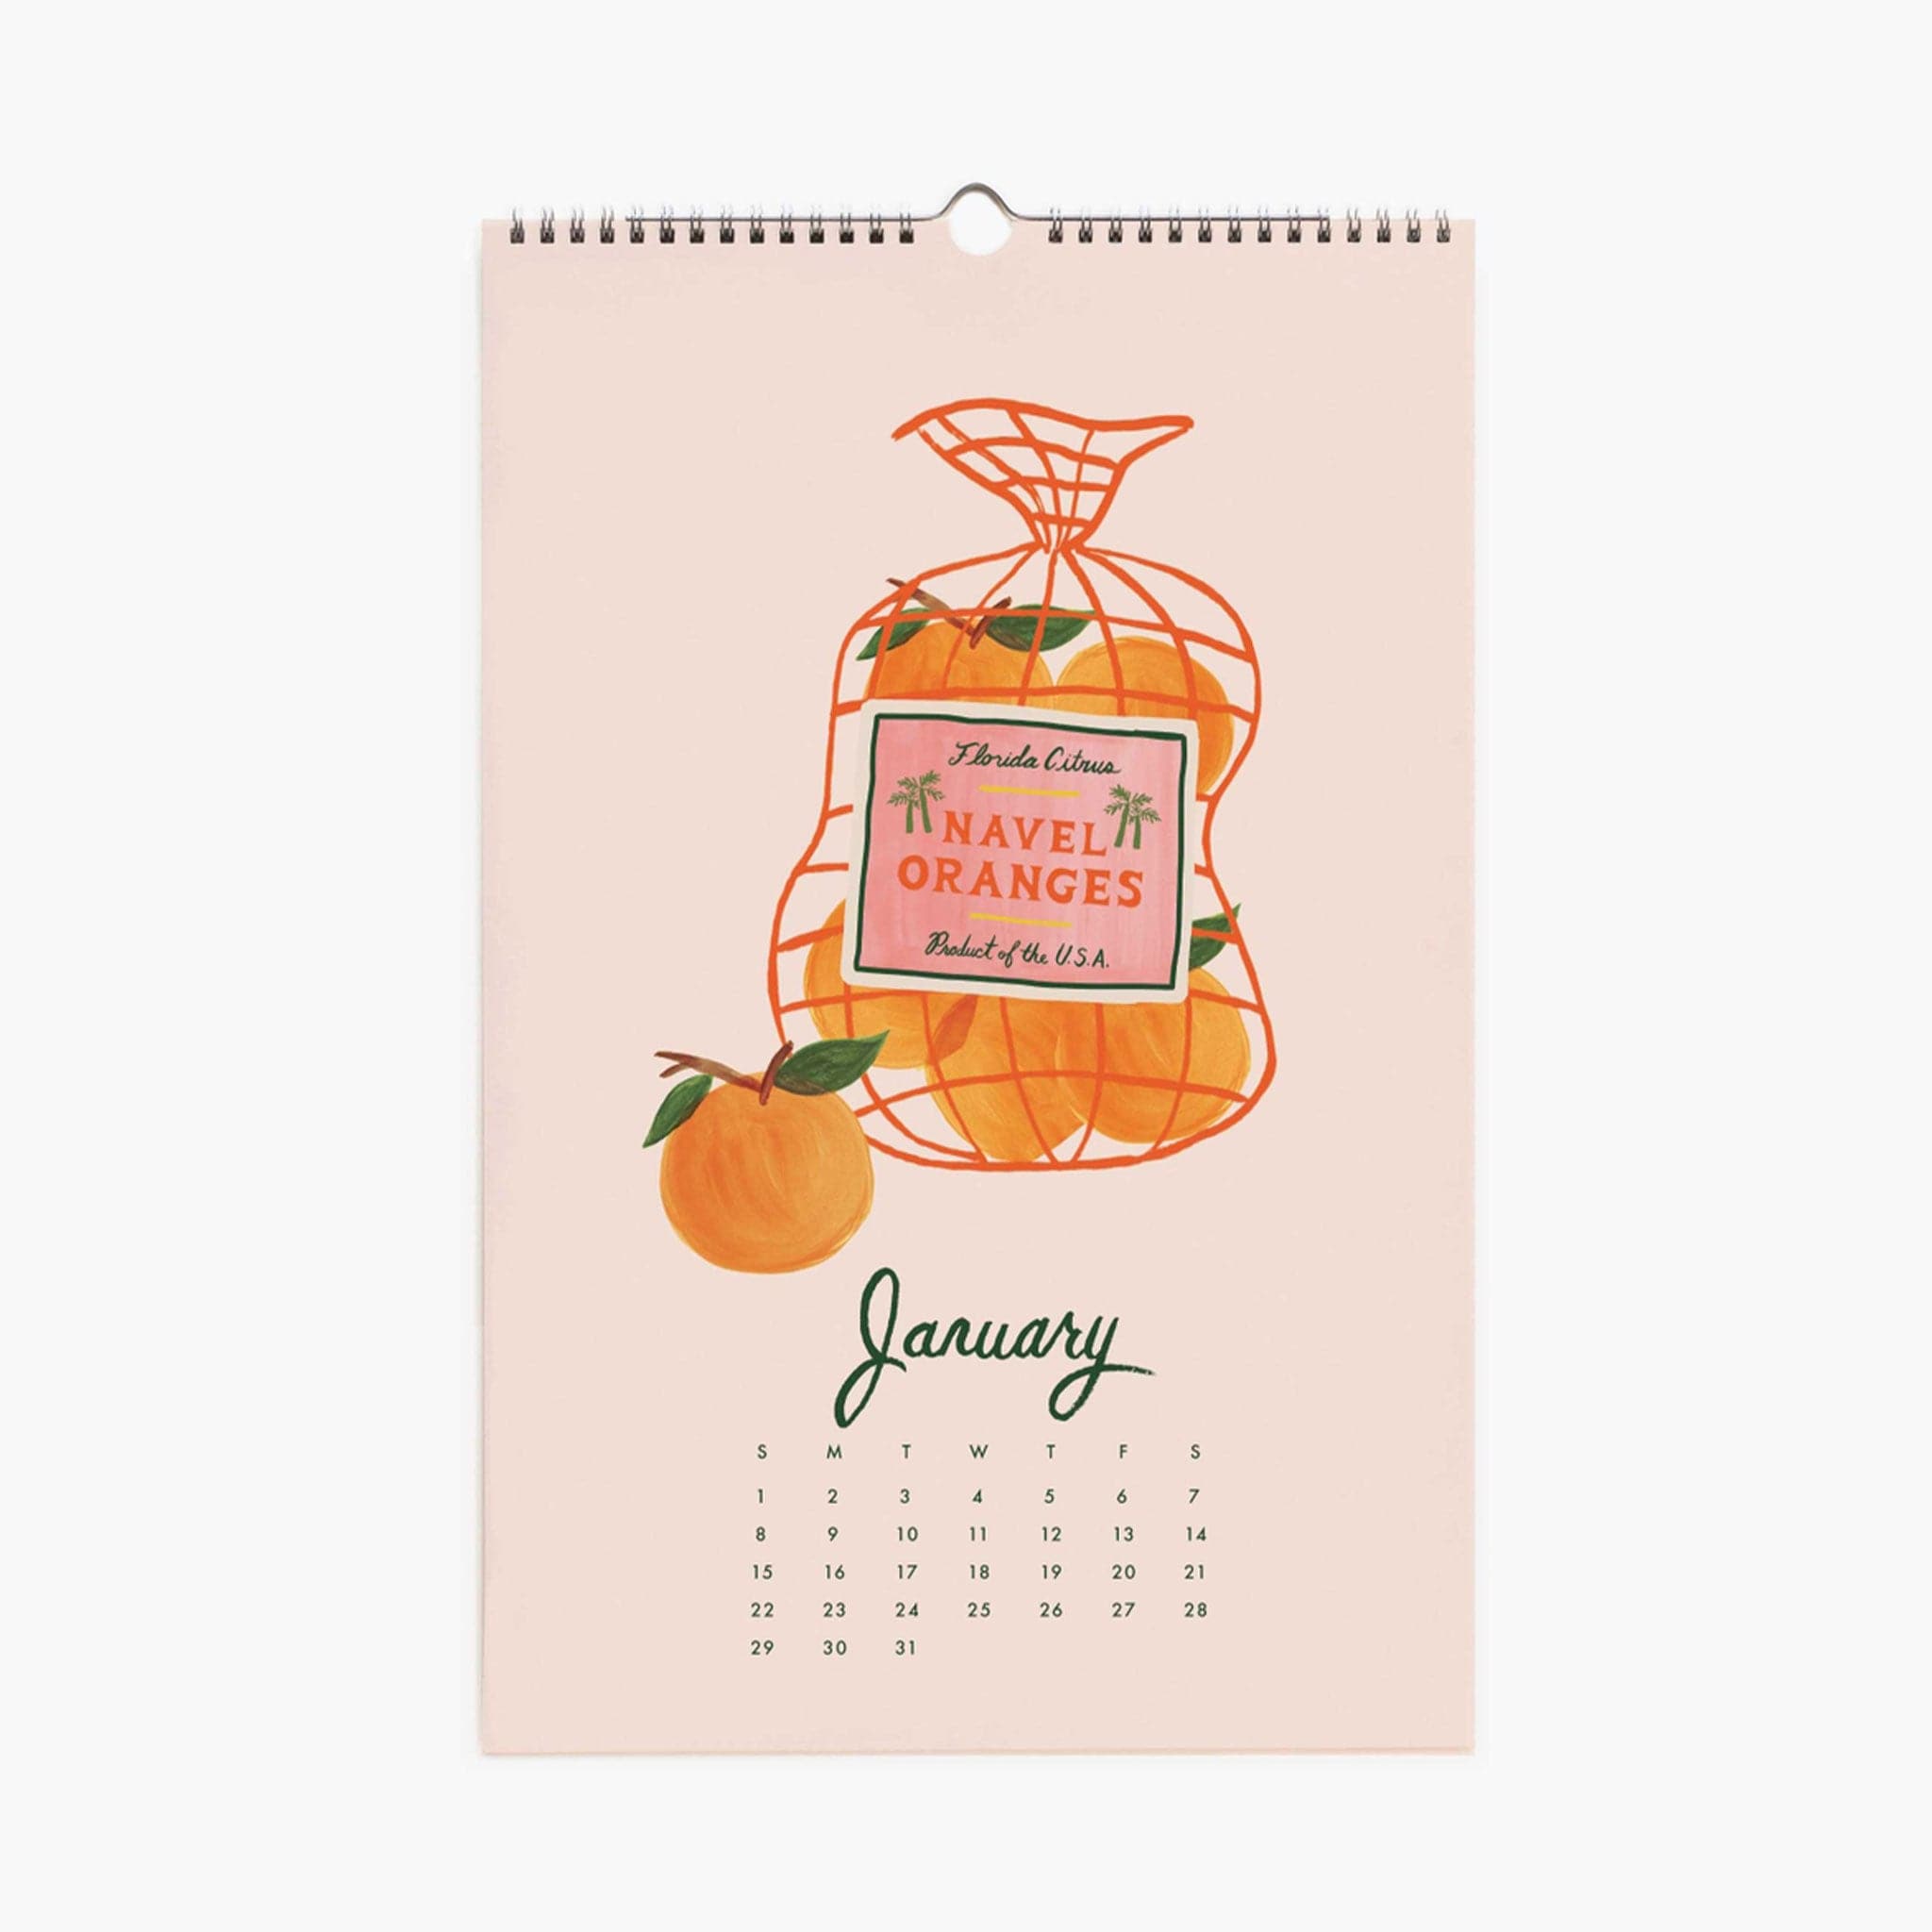 A peek inside the calendar. There is an illustration of a bag of oranges with the month listed out on the lower half of the page.